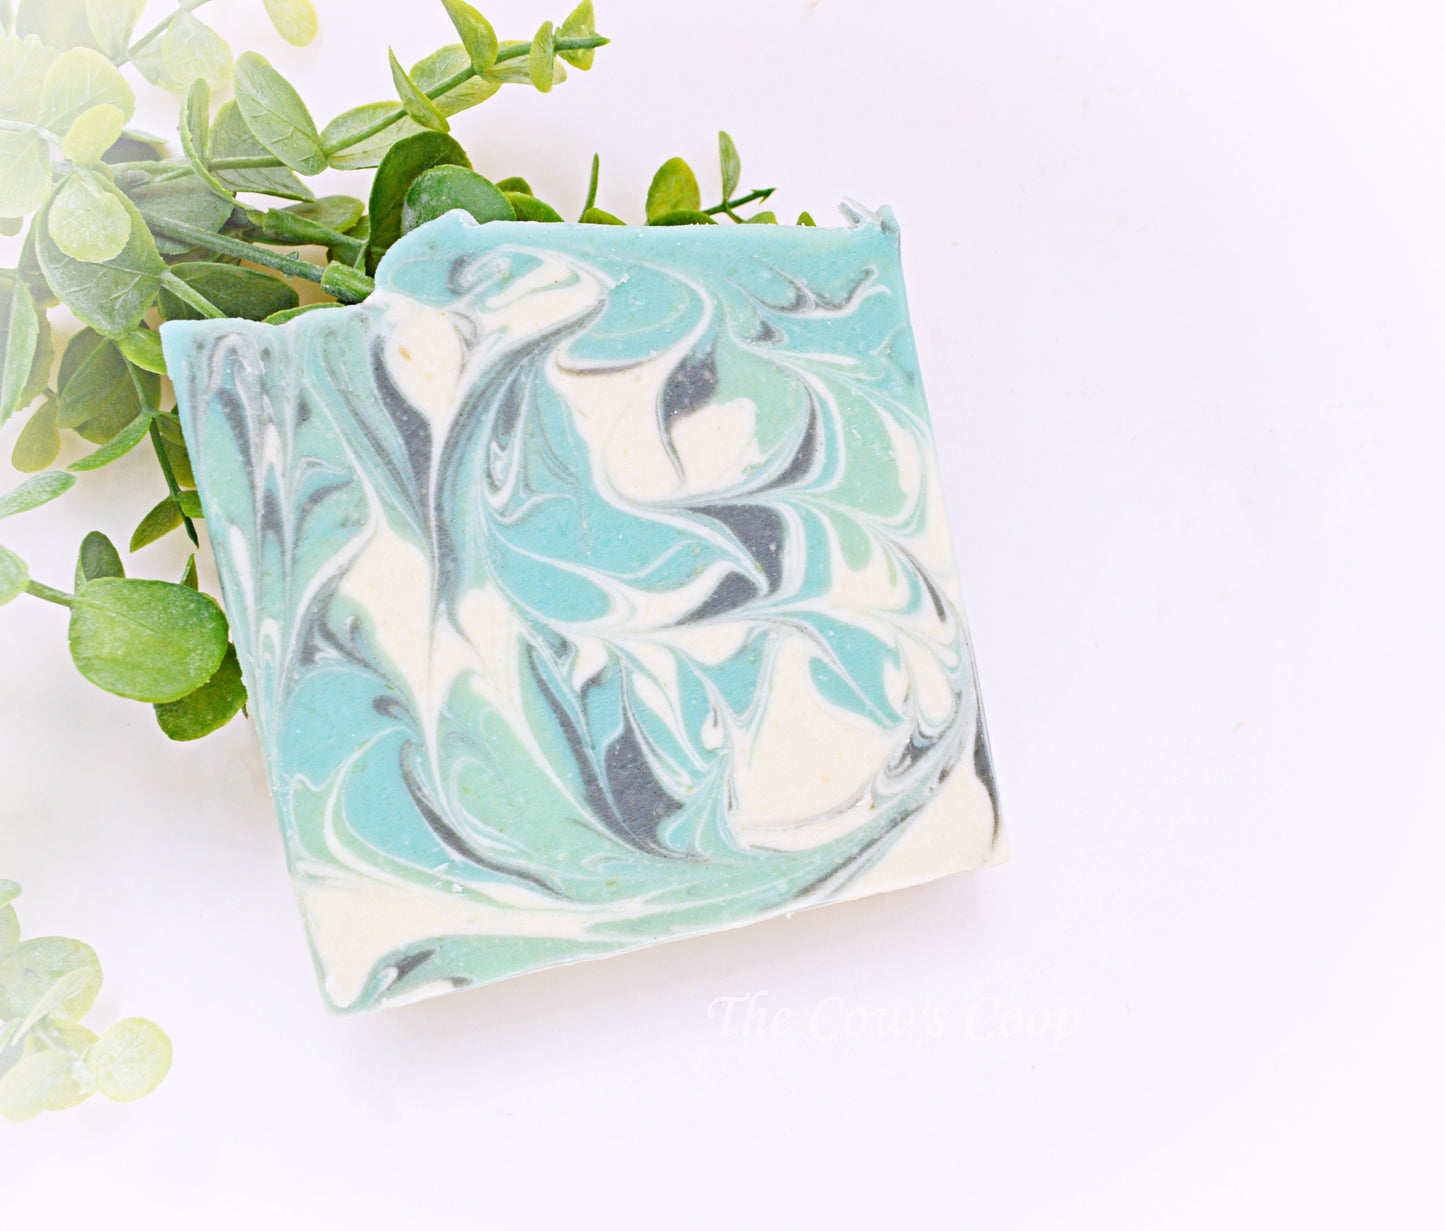 Northern Country Girl (Crisp Cotton and Sweet Pea) - Cow Milk Soap